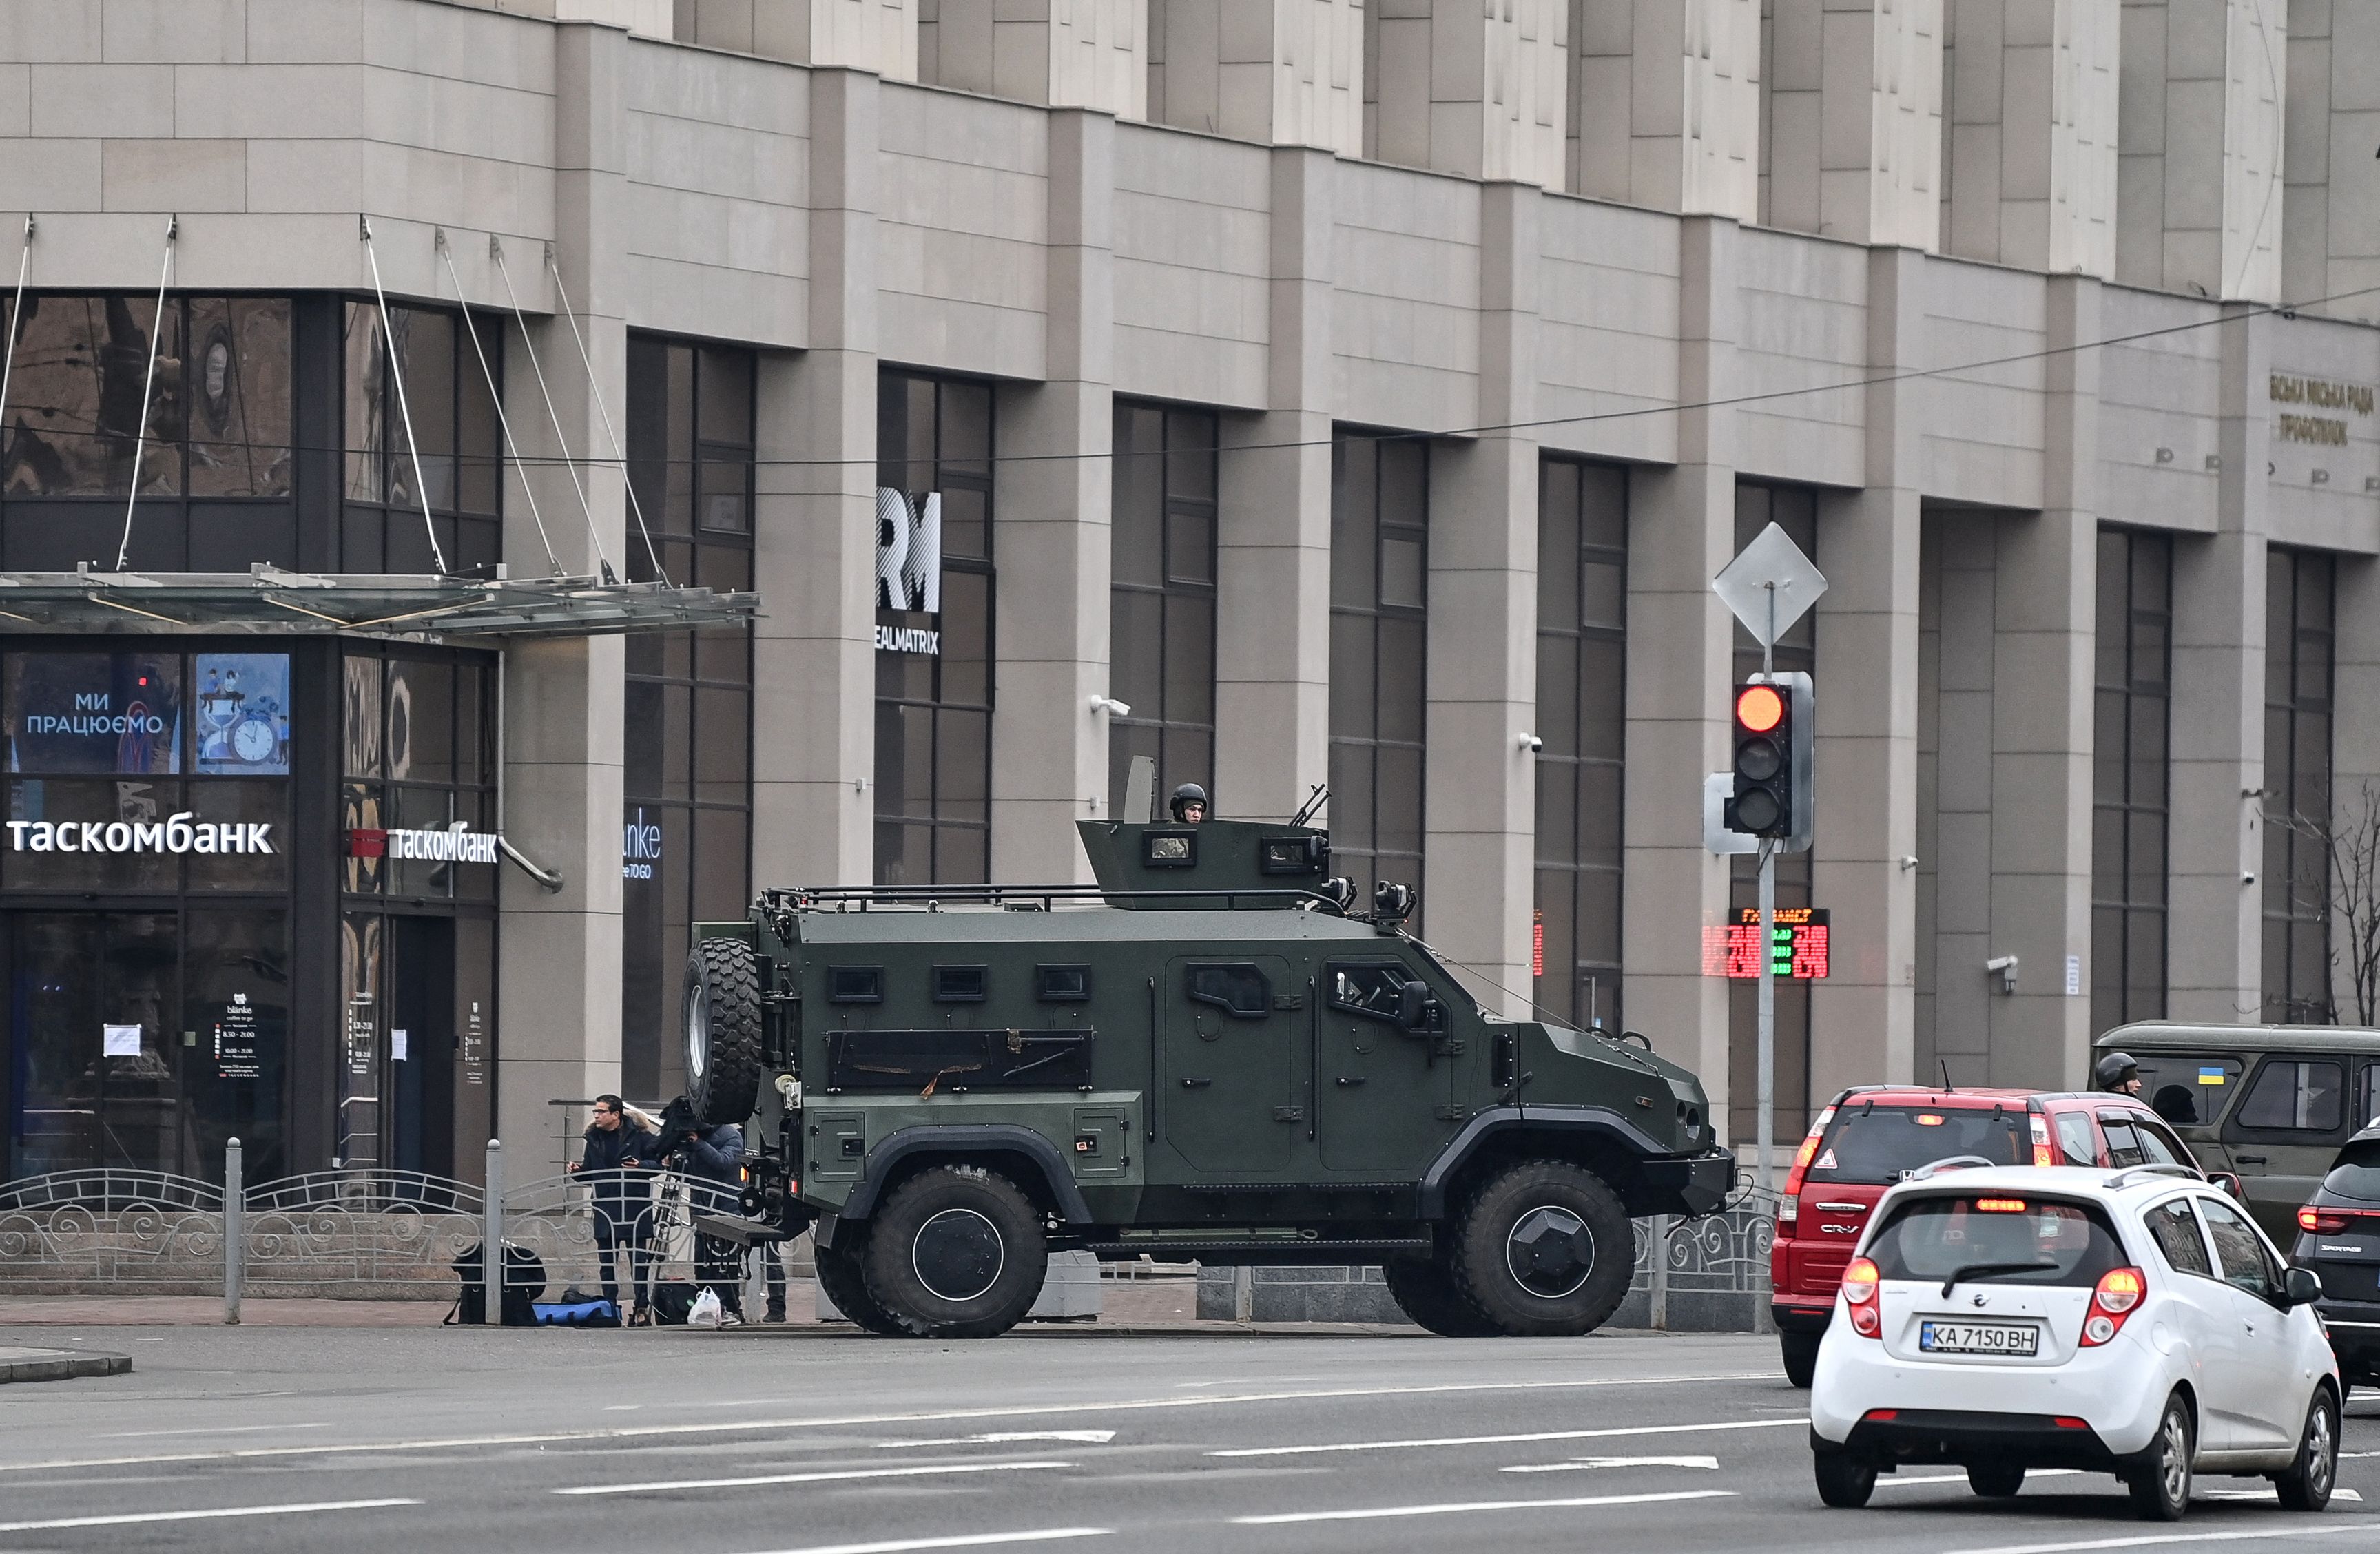 An Ukrainian armored military vehicle is pictured in central Kyiv on February 24, 2022.